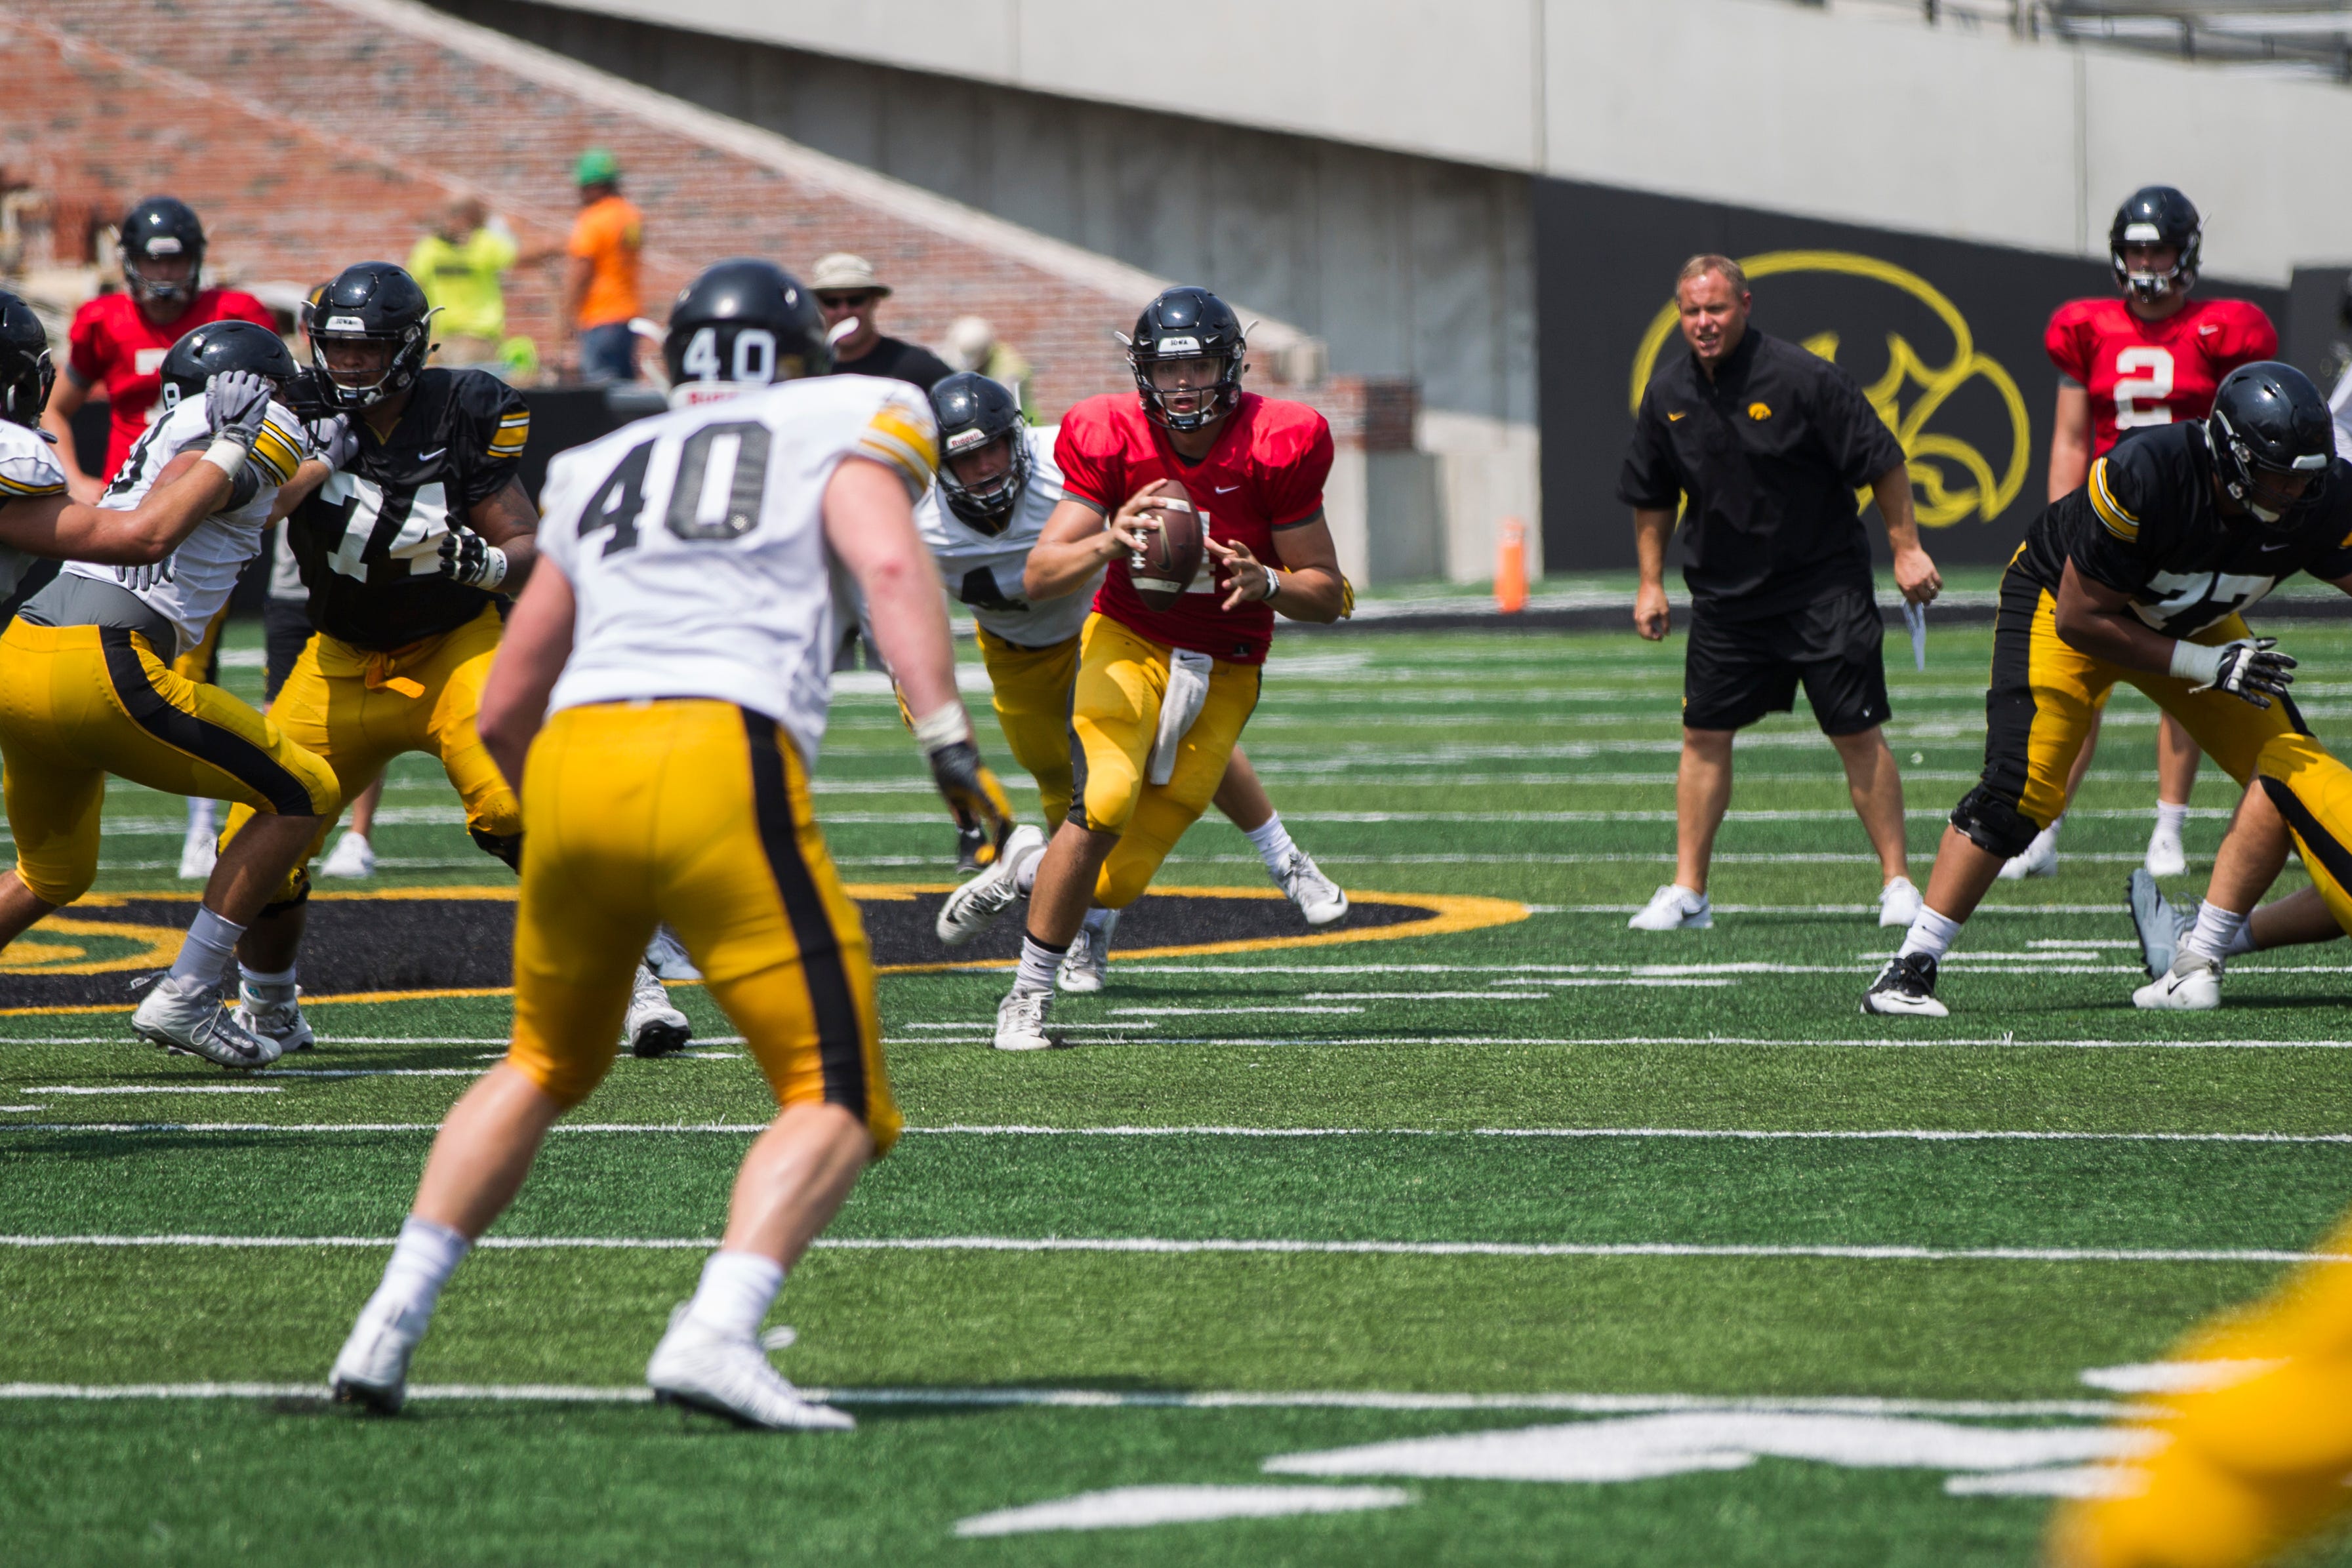 Iowa quarterback Nate Stanley rolls out of the pocket  during a Kids Day practice on Saturday, Aug. 11, 2018, at Kinnick Stadium in Iowa City.